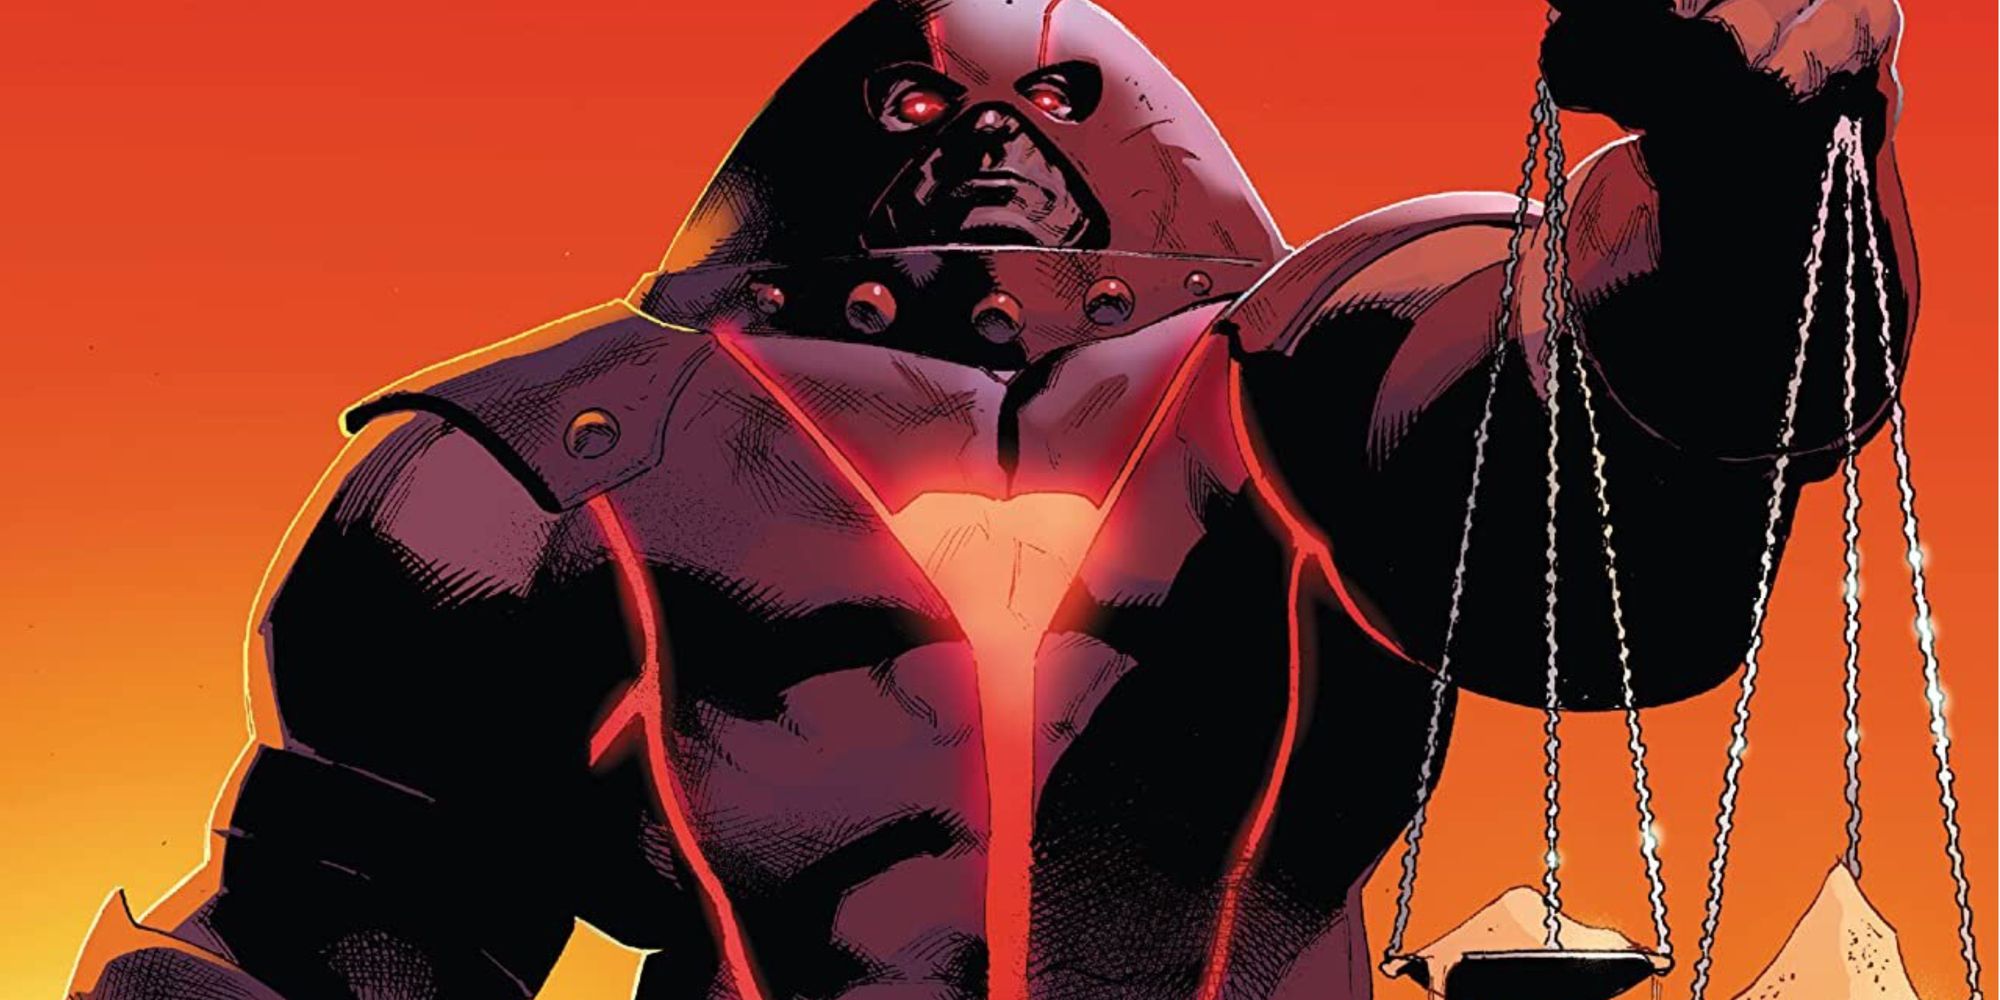 Juggernaut looms while holding a scale from Marvel Comics 